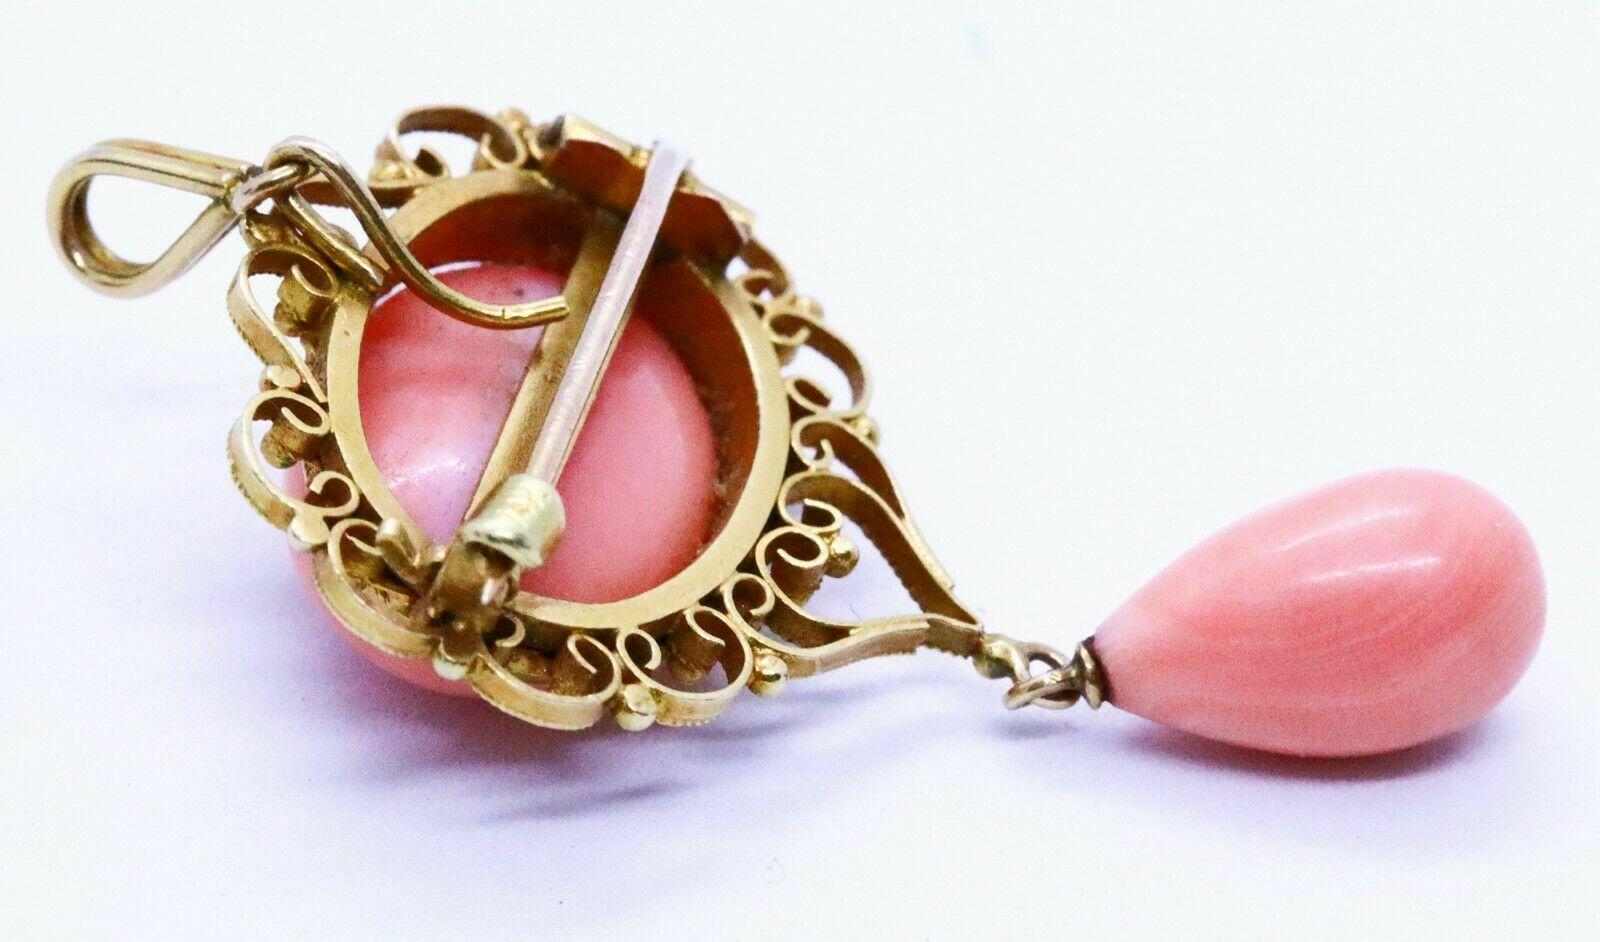 This gorgeous rare Italian antique salmon coral pendant brooch was handmade in Italy circa 1900's.  It is crafted in 14k yellow gold with the filigree technique.  The piece is set with a pin steam steam bar on the reverse and also with 
an invisible